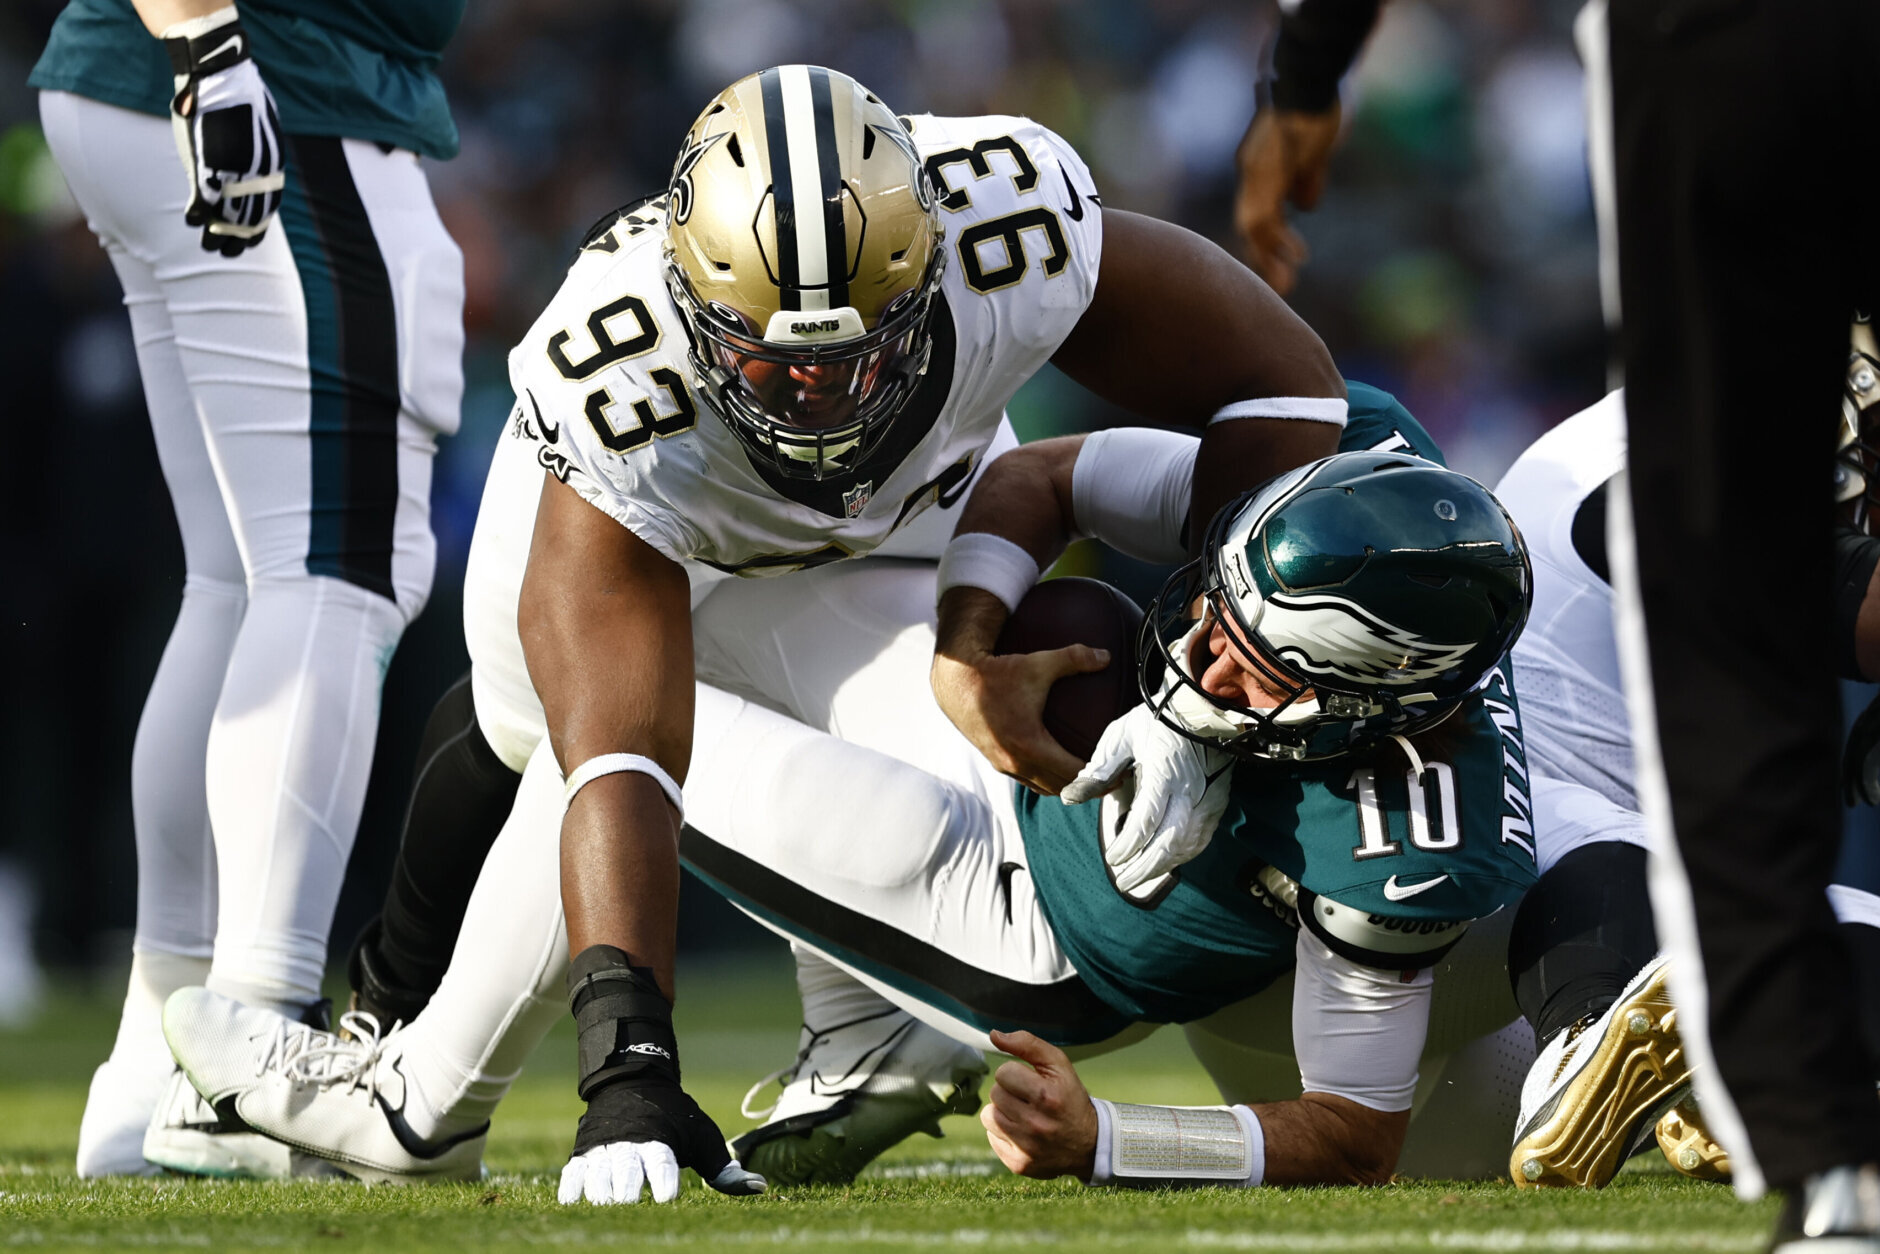 <p><em><strong>Saints 20</strong></em><br />
<em><strong>Eagles 10</strong></em></p>
<p>Don&#8217;t worry, Philly fans. This is all just a ploy to get Jalen Hurts the MVP award. The Eagles will win in Week 18 and clinch the top seed in the NFC anyway.</p>
